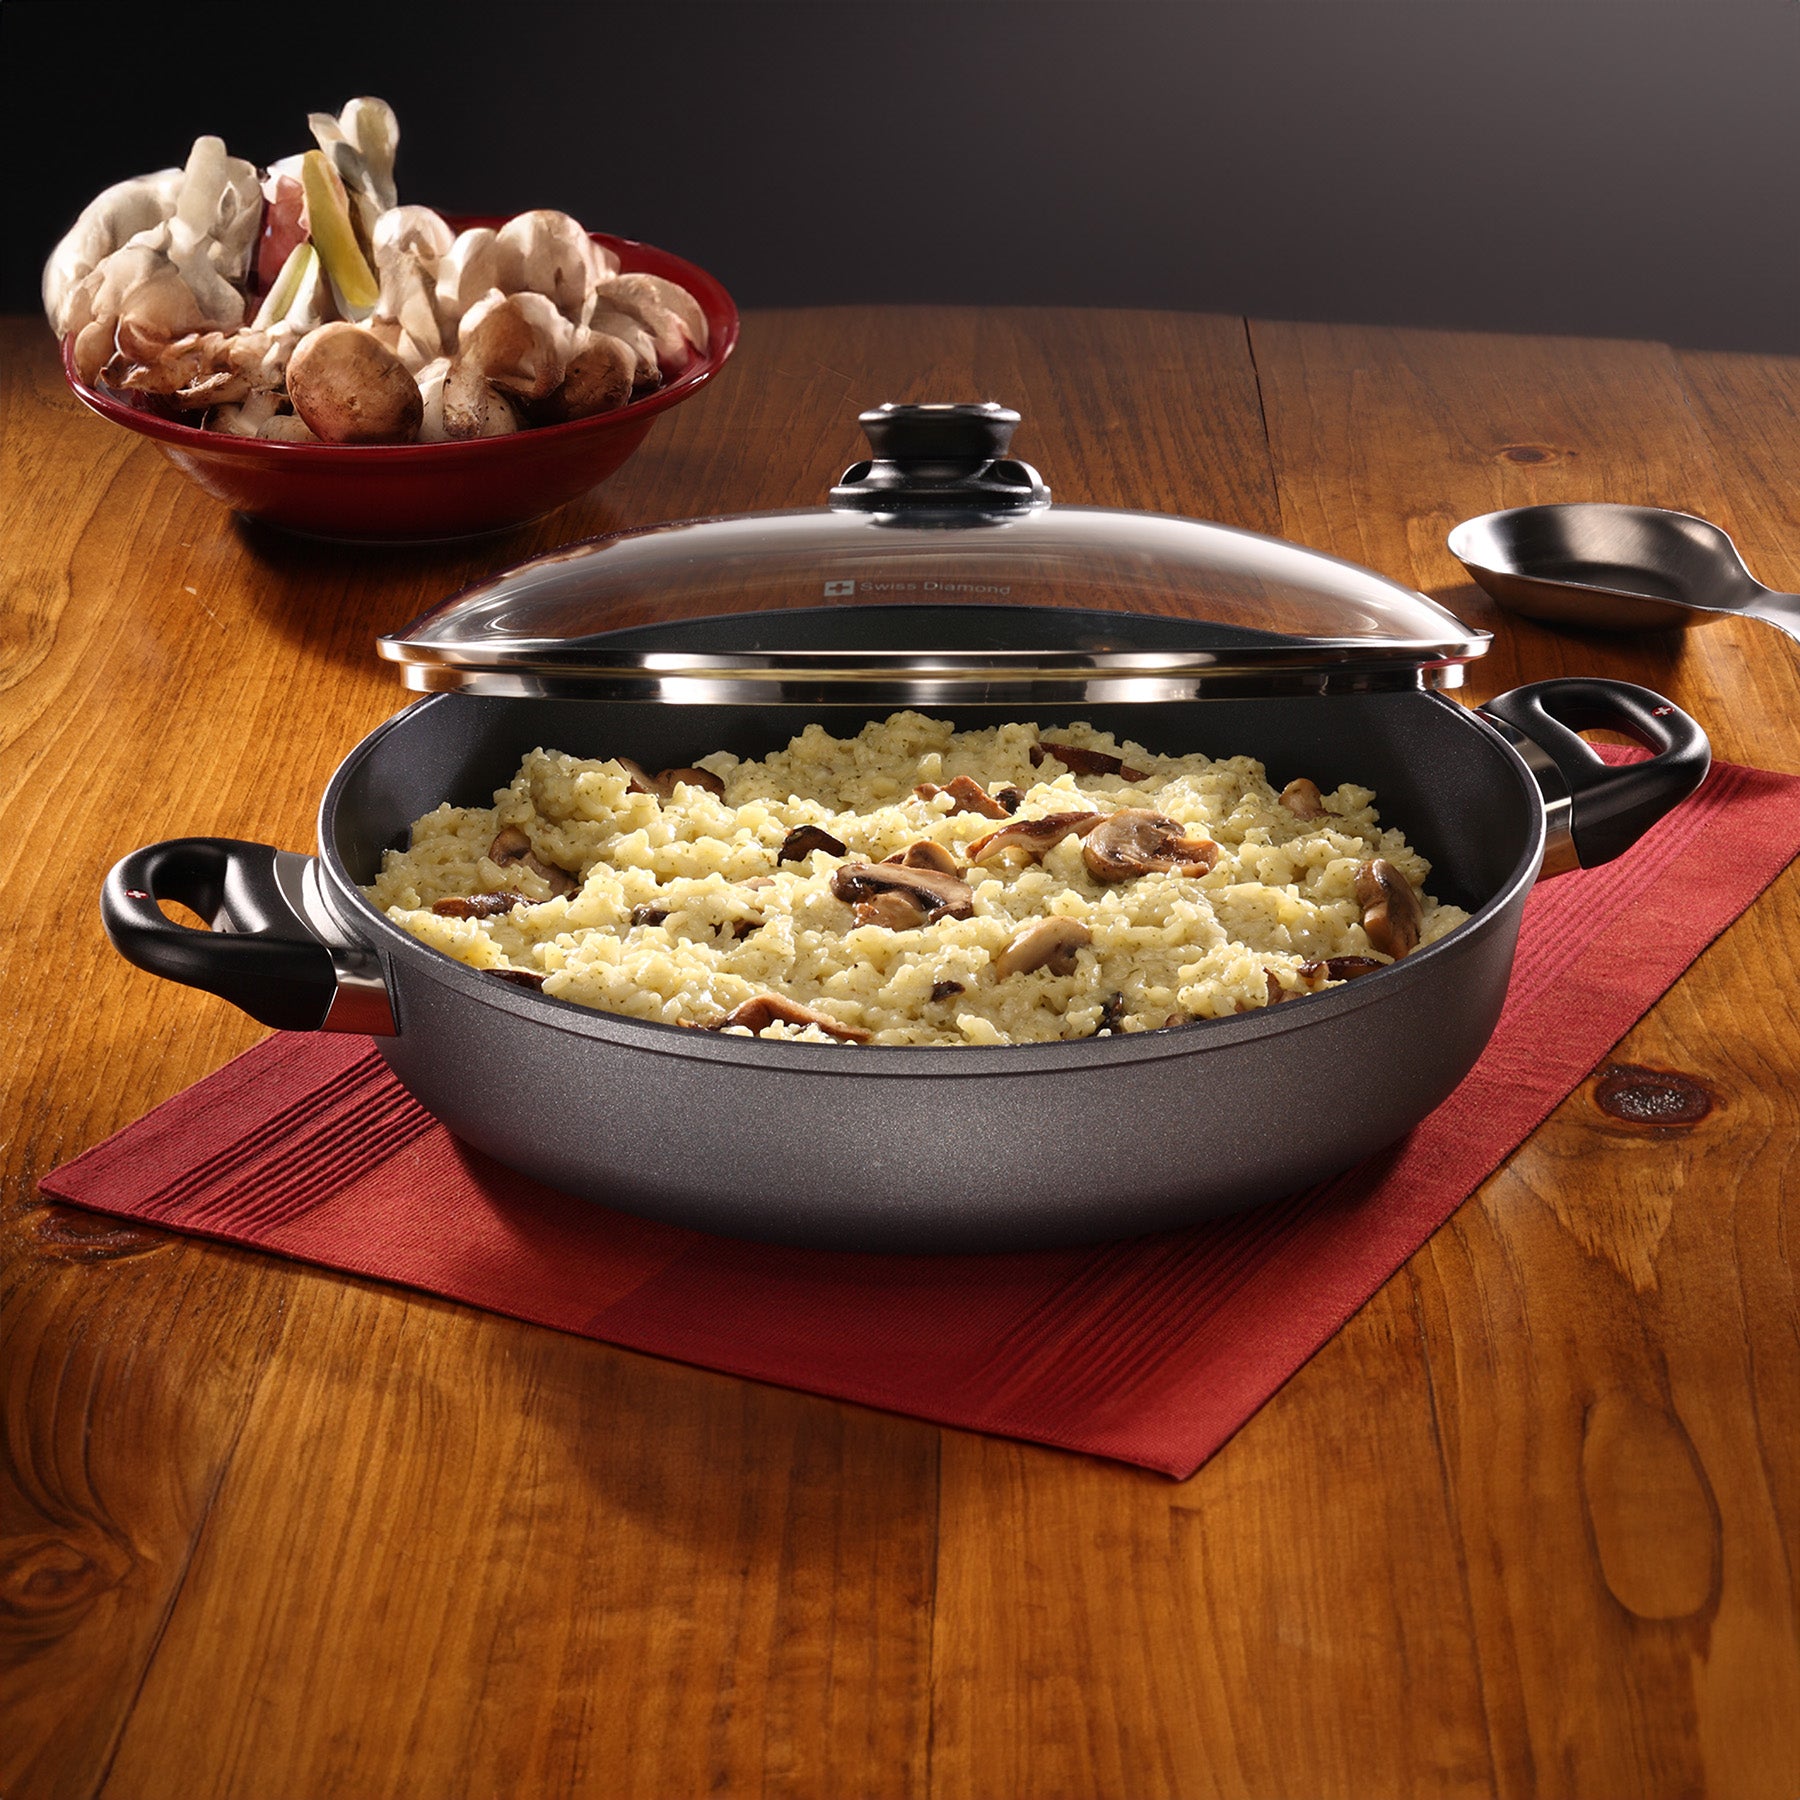 HD Nonstick Sauteuse with Glass Lid in use on wooden dining room table